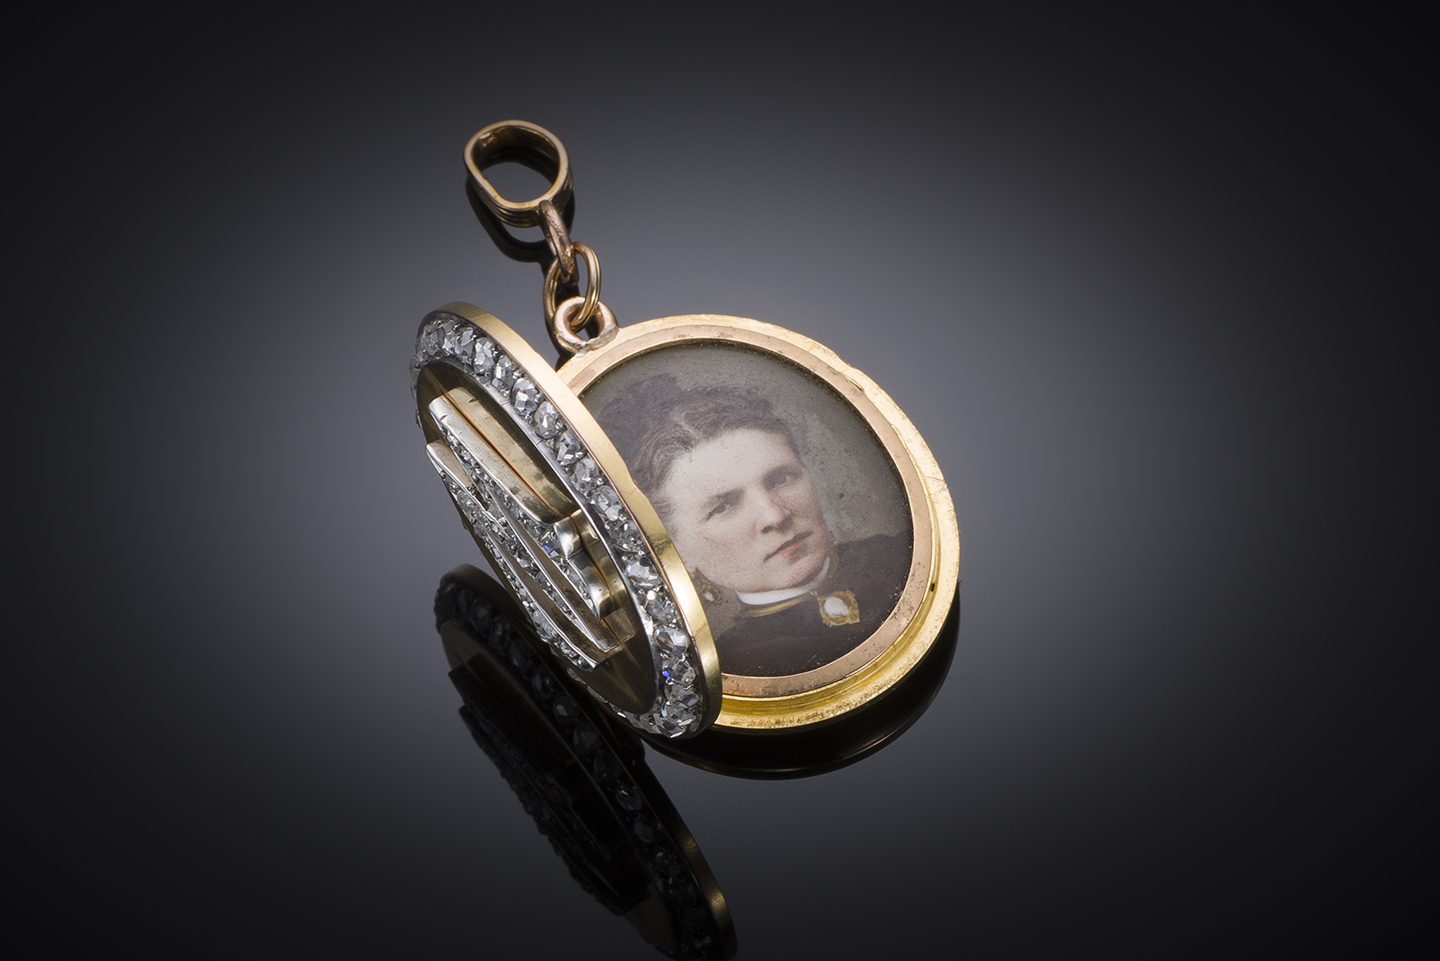 French diamond pendant with enamelled portrait (Deroche process). Sentiment jewel with letter M symbolizing love dated 1874.-2